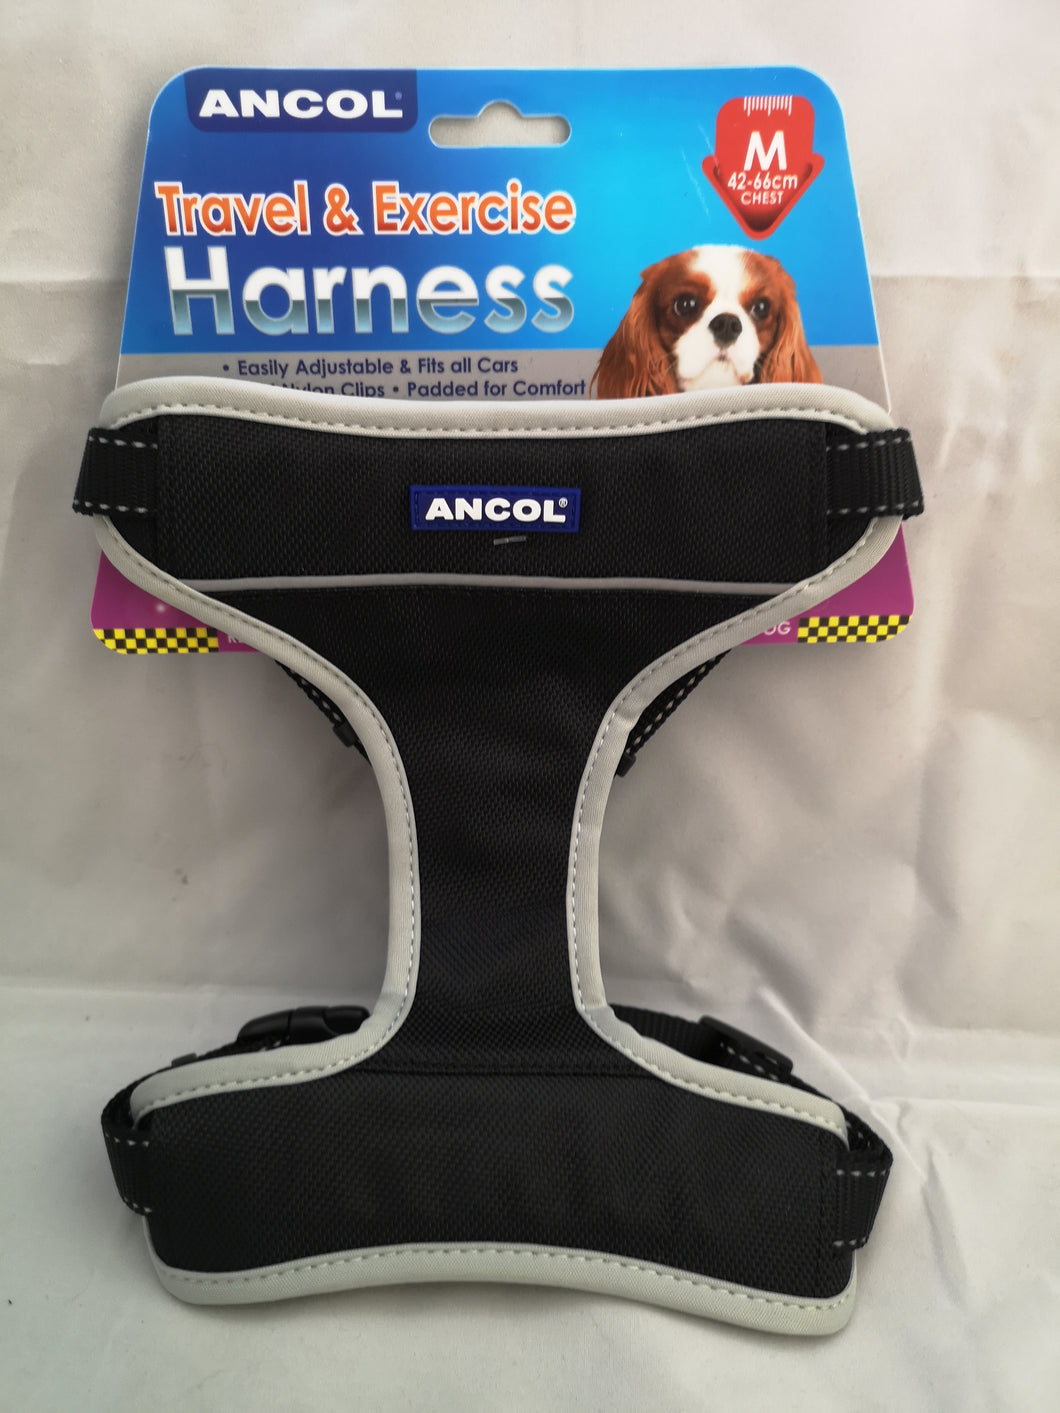 Ancol Travel and Exercise Harness